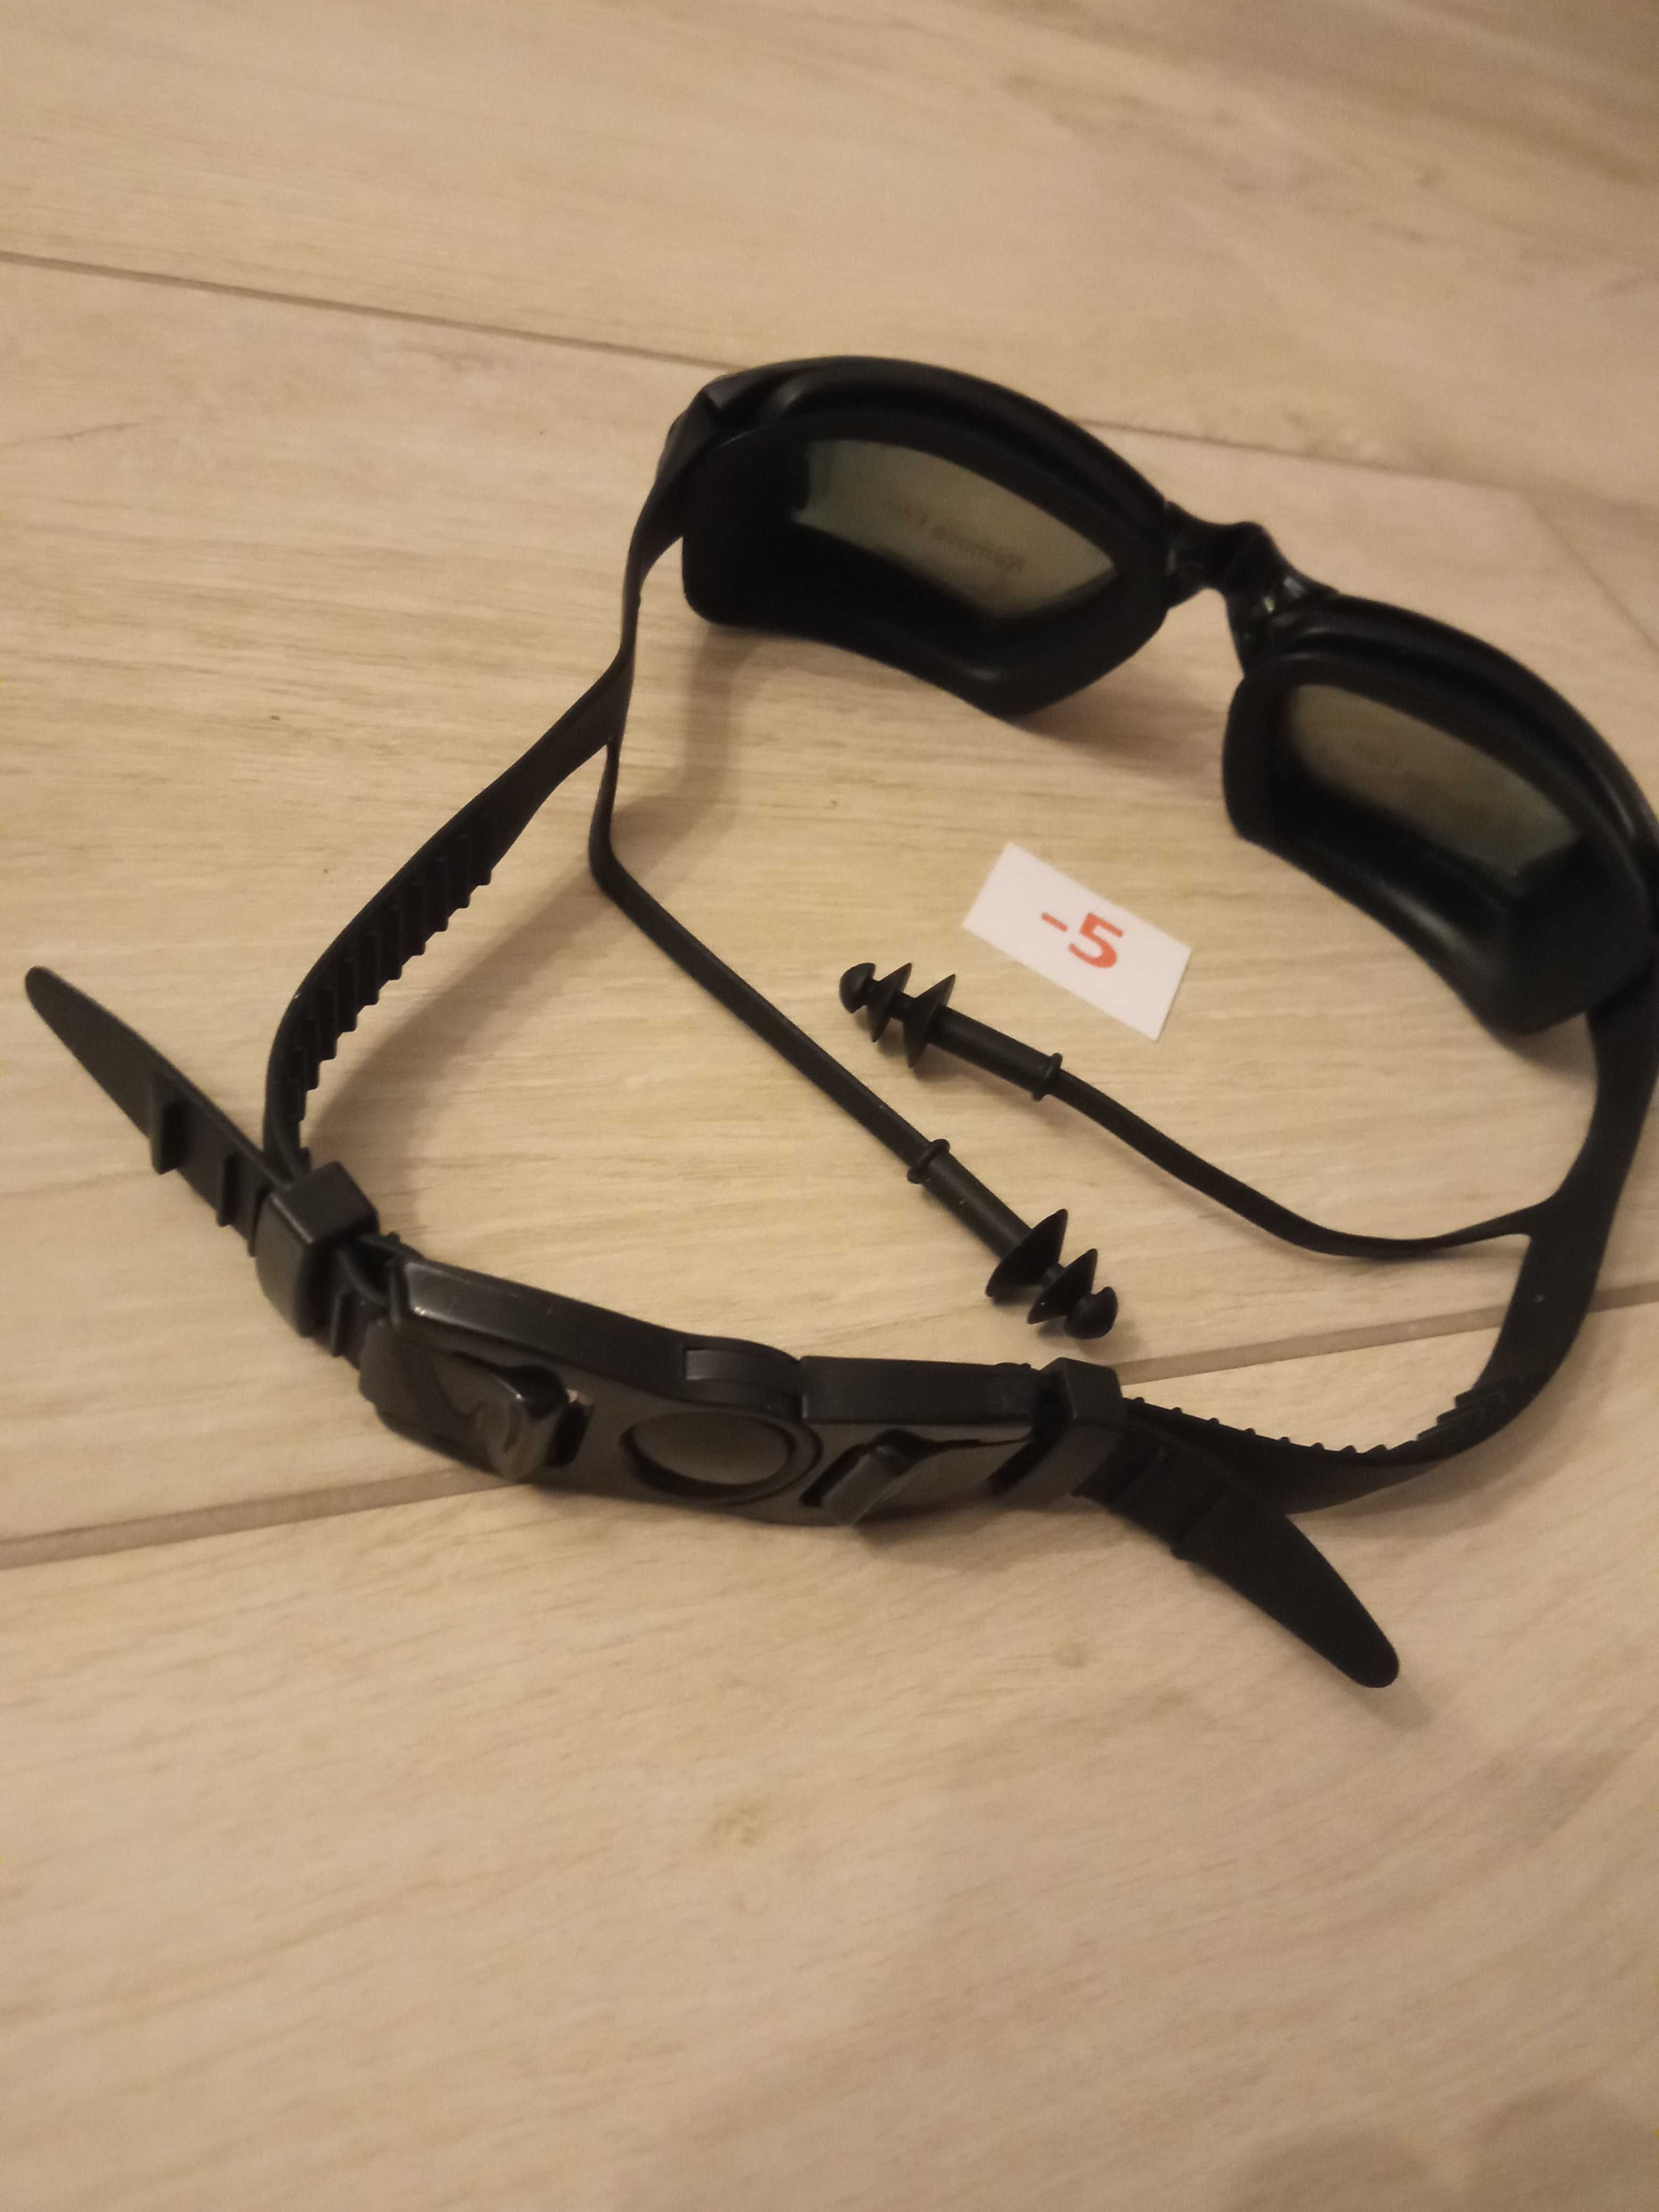 New swimming goggles – 5 diopters